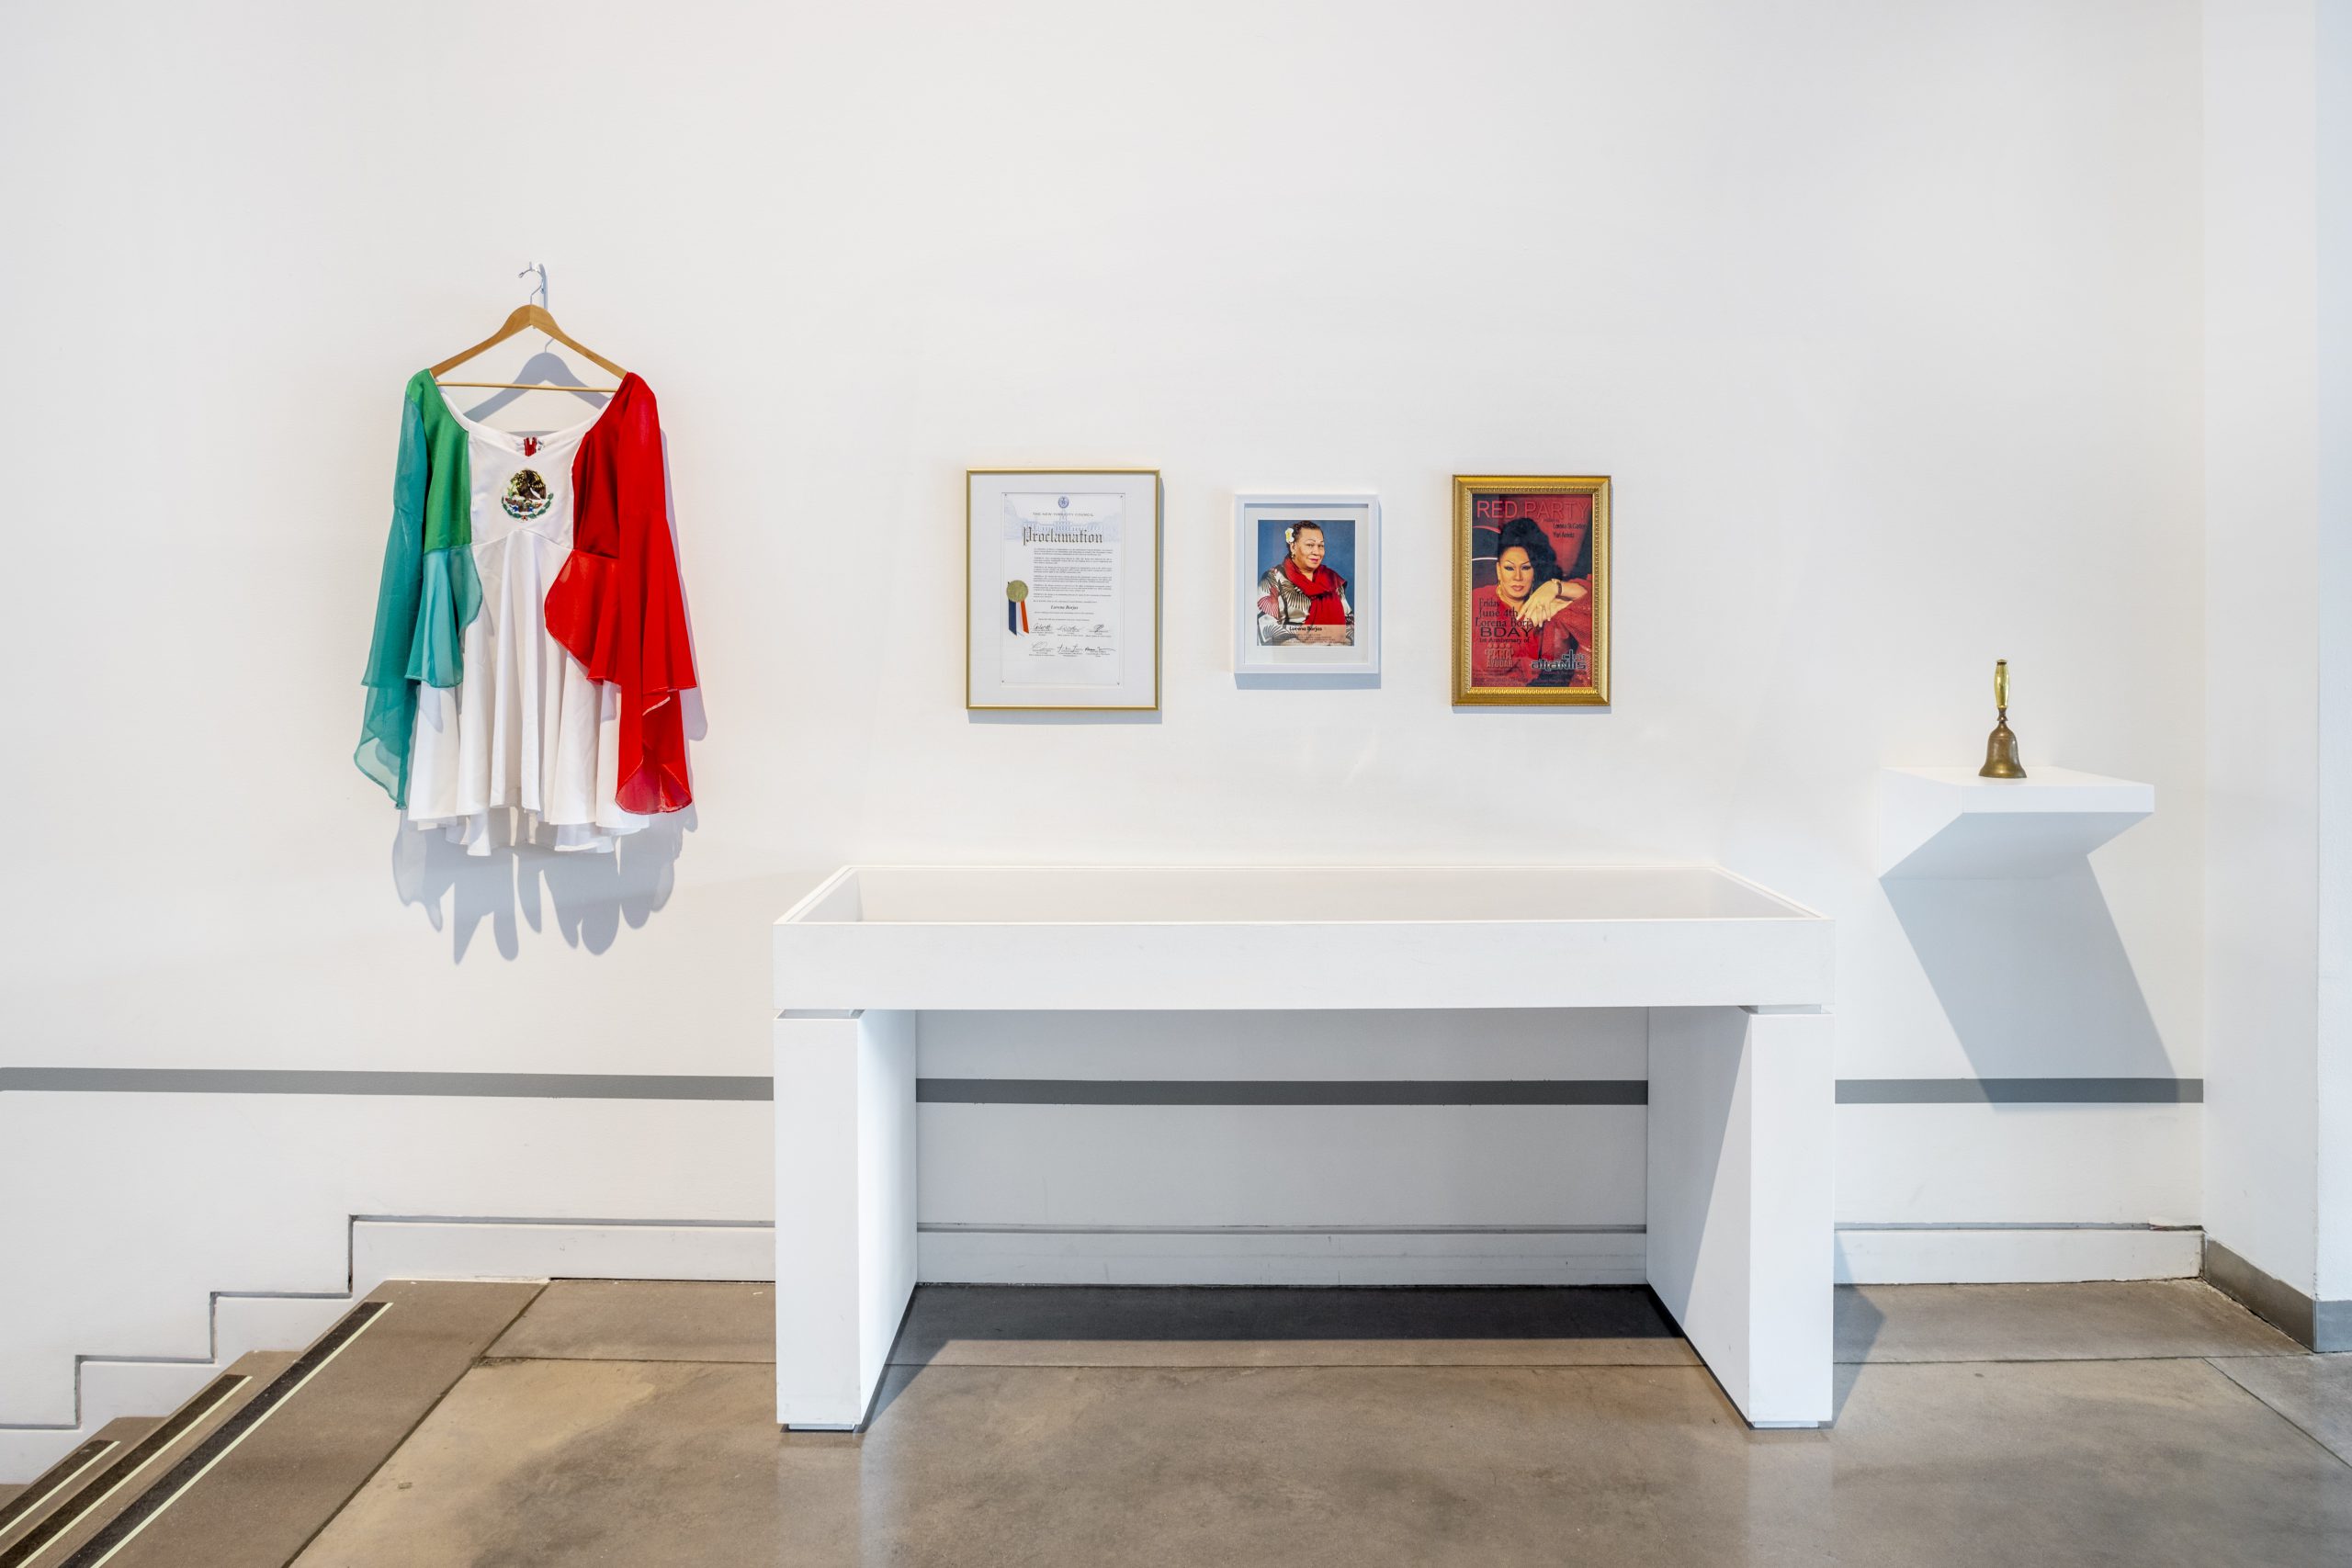 A white exhibition wall with a series of objects on display. Starting on the left is a Mexican flag fashioned into a dress hanging on a clothes hanger. Centered, is a framed certificate, a framed portrait of Lorena Borjas, and a framed magazine cover featuring Lorena Borjas. On the right is a gold handbell sitting on a white, exhibition shelf. In front of the wall is a long, rectangular display case.